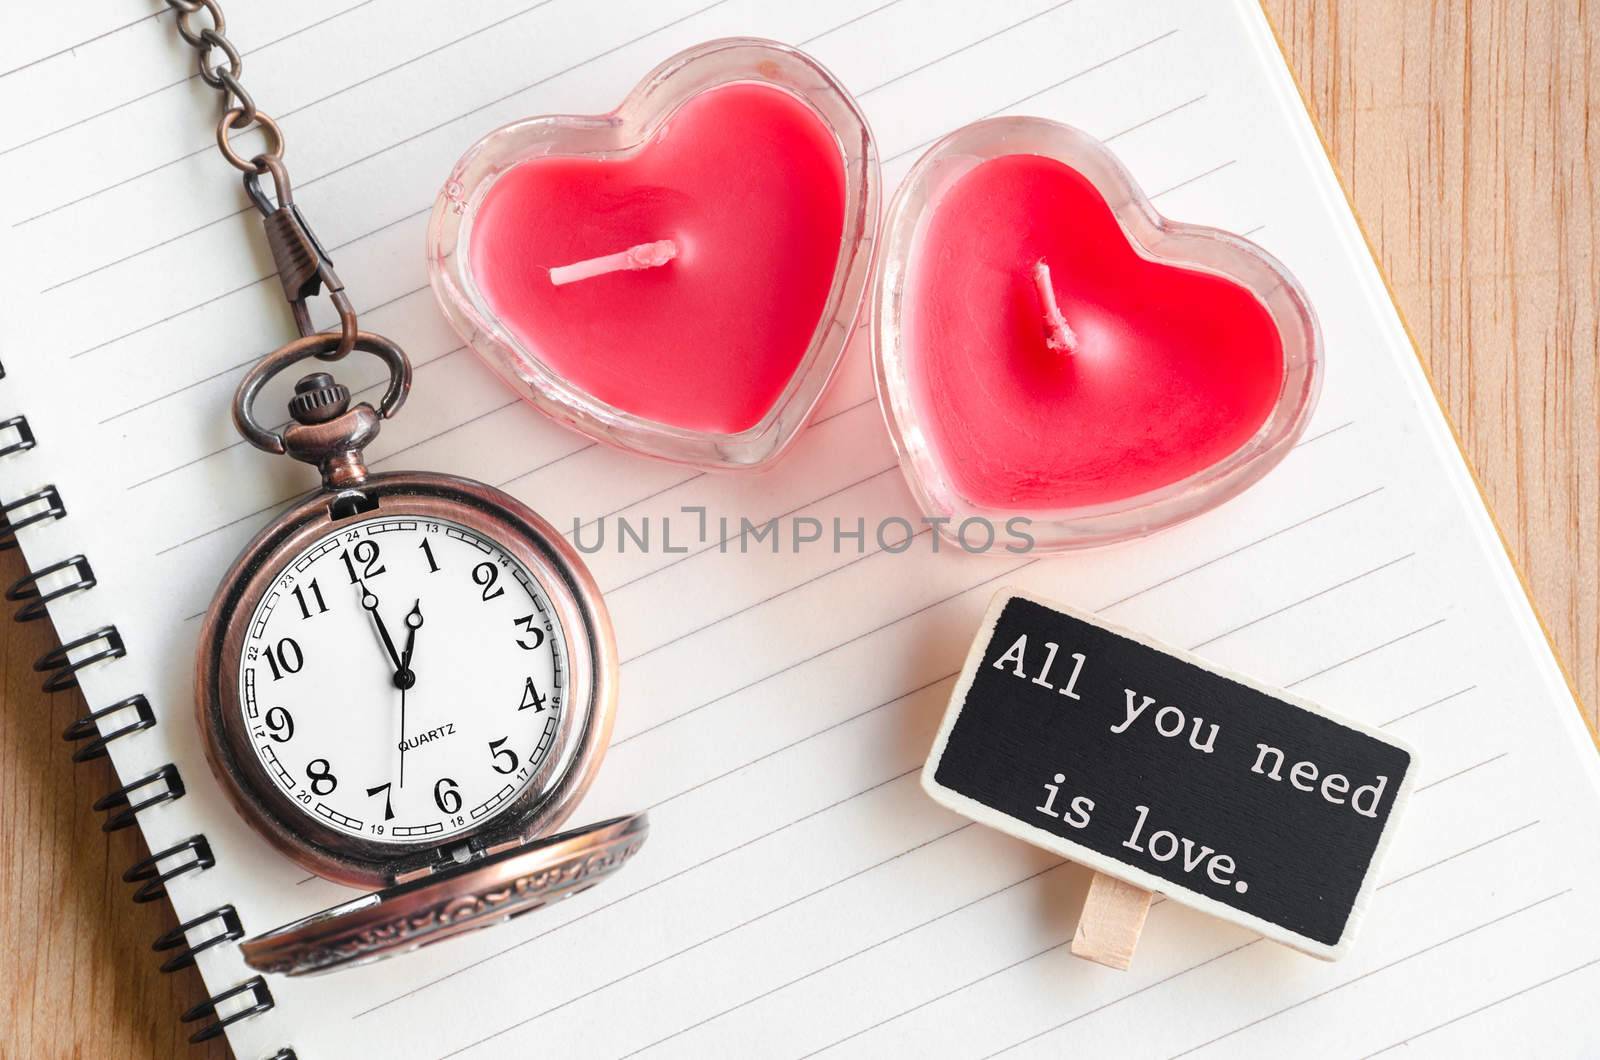 All you need is love. Red heart candle and pocket watch with open diary on wooden background.